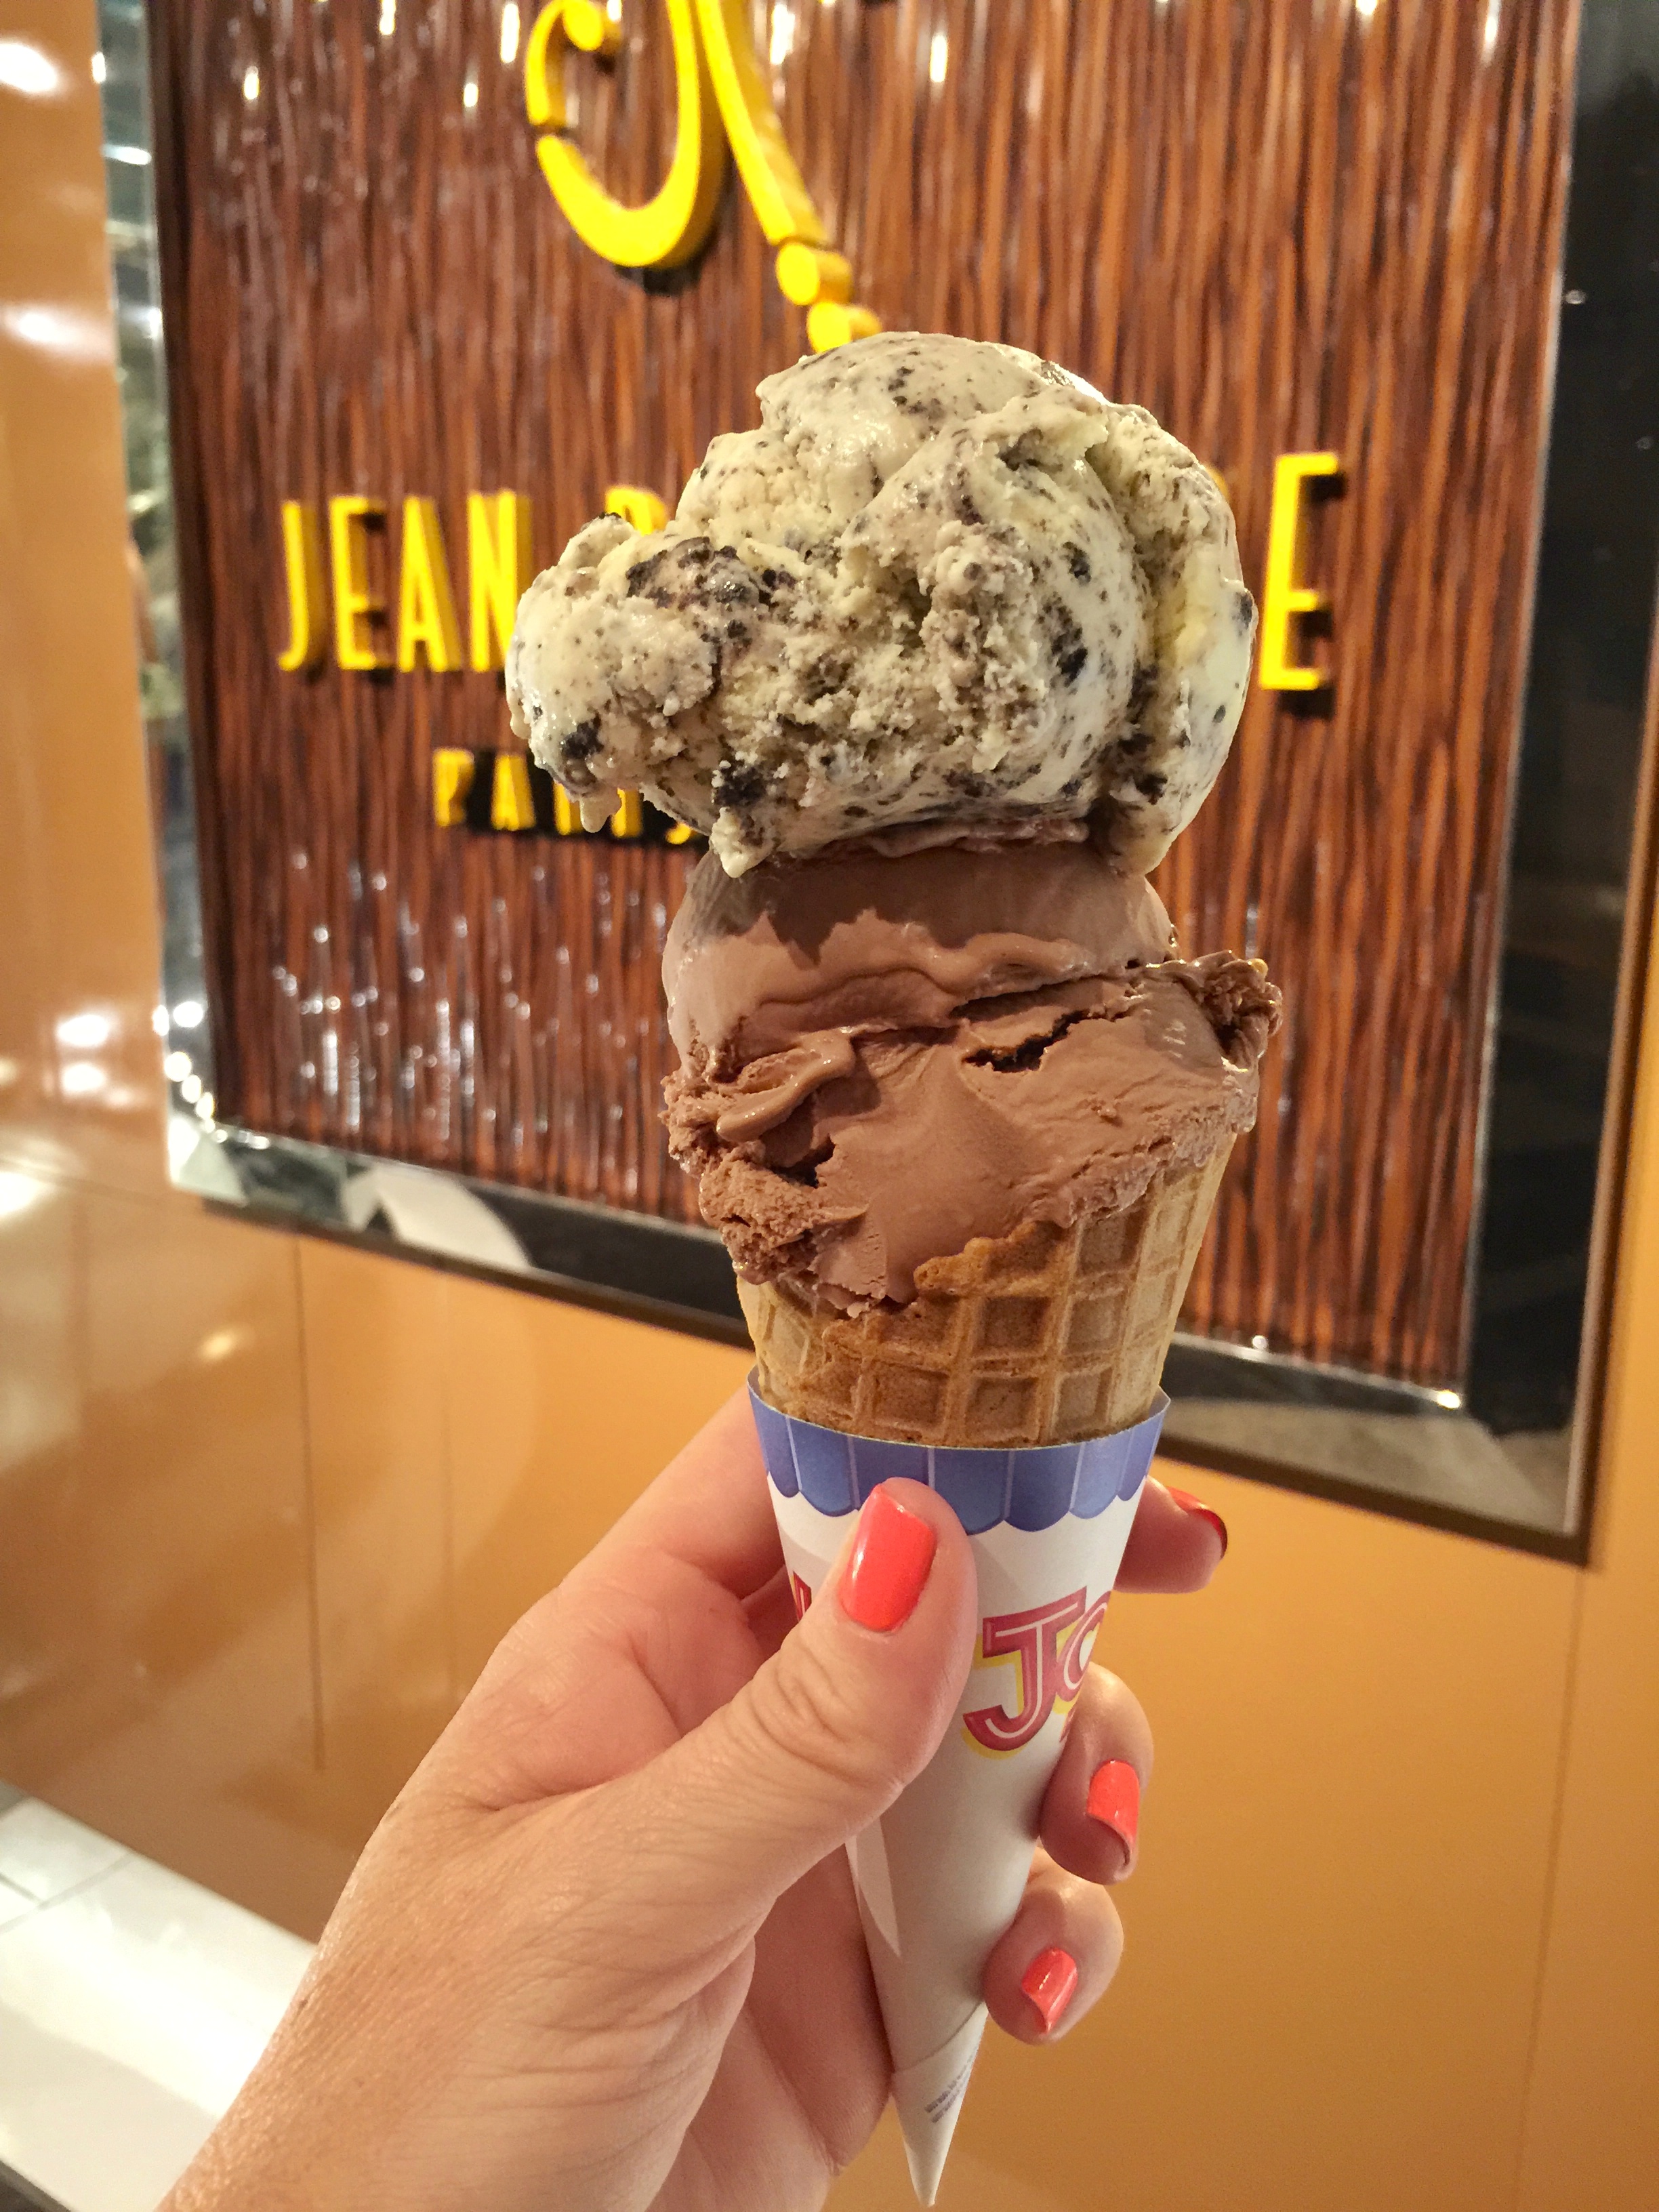 Cookies & Cream and Nutella Ice Cream in a Waffle Cone